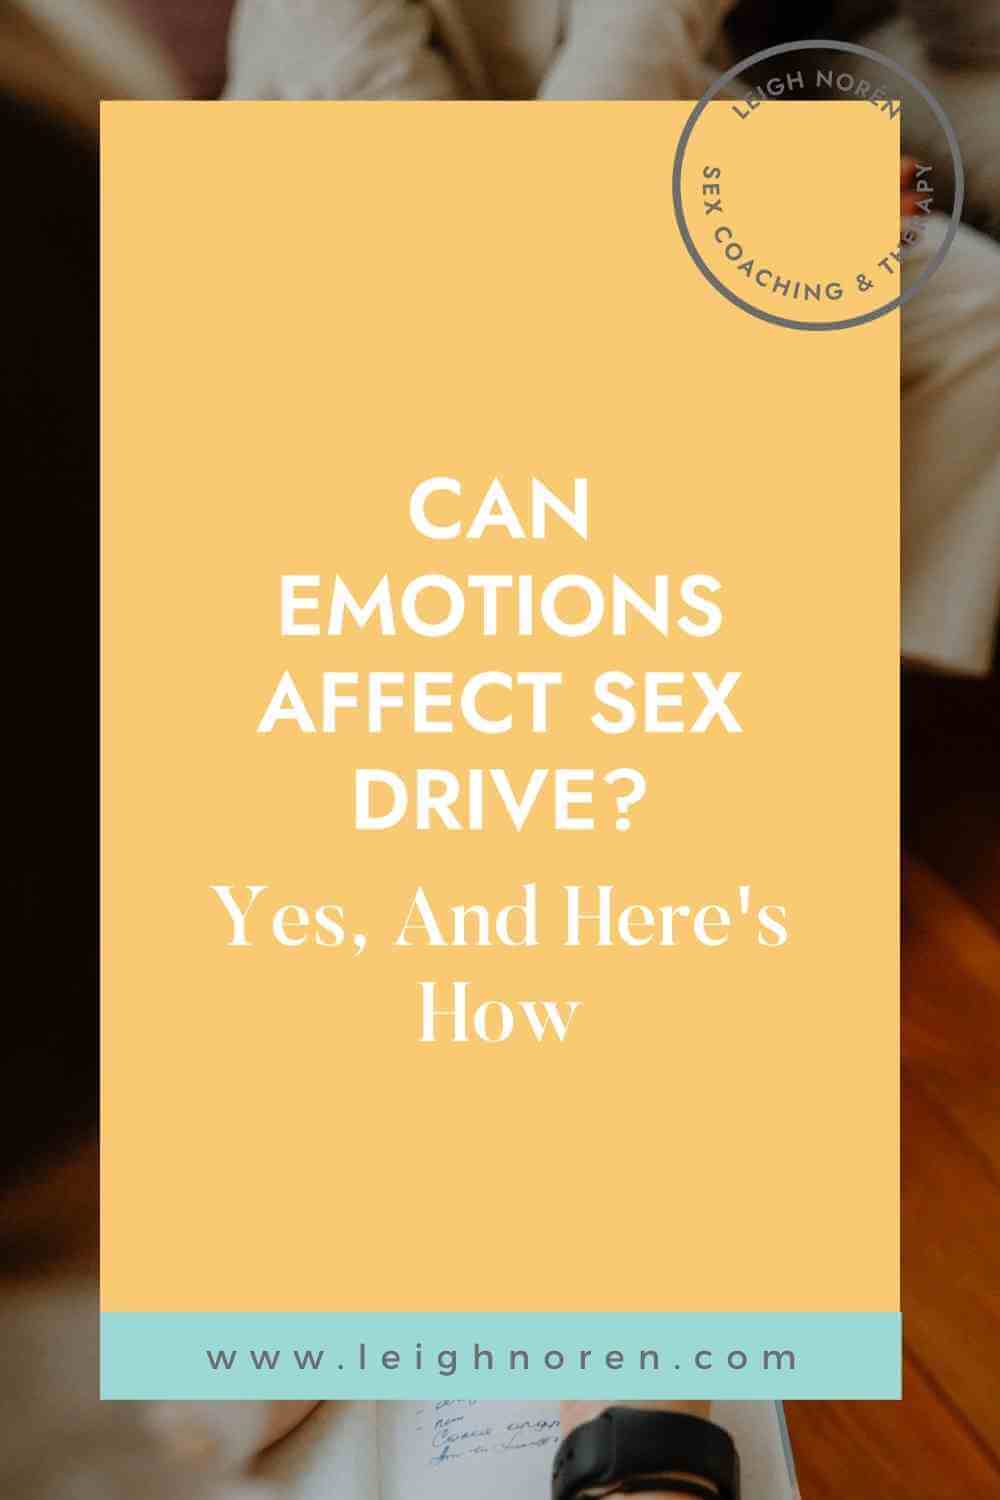 Can Emotions Affect Sex Drive? Yes, And Here's How.